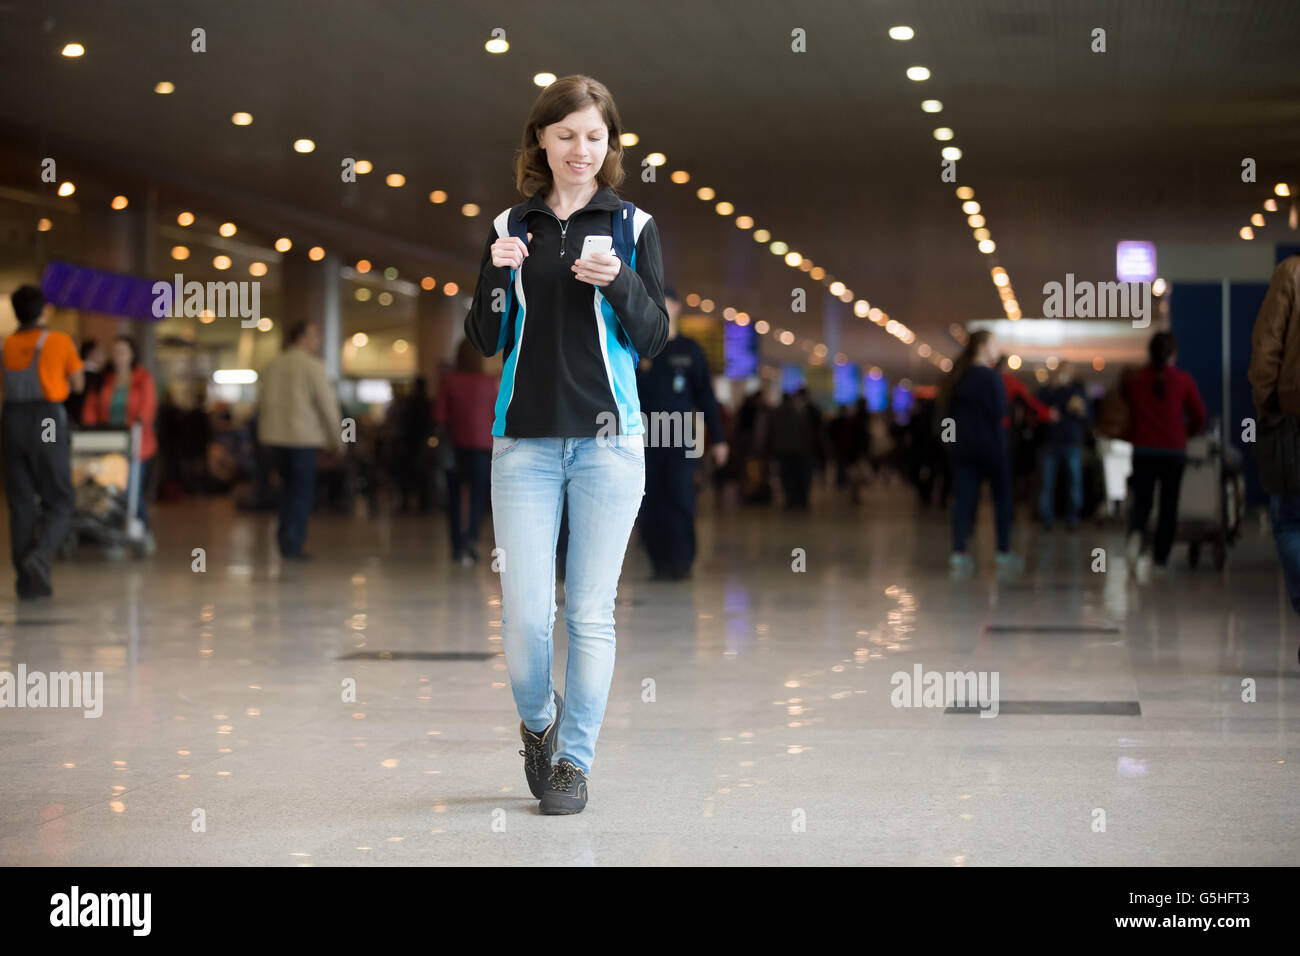 Smiling young woman in 20s with backpack walking in airport terminal, using cell phone app, messaging, wearing jersey Stock Photo